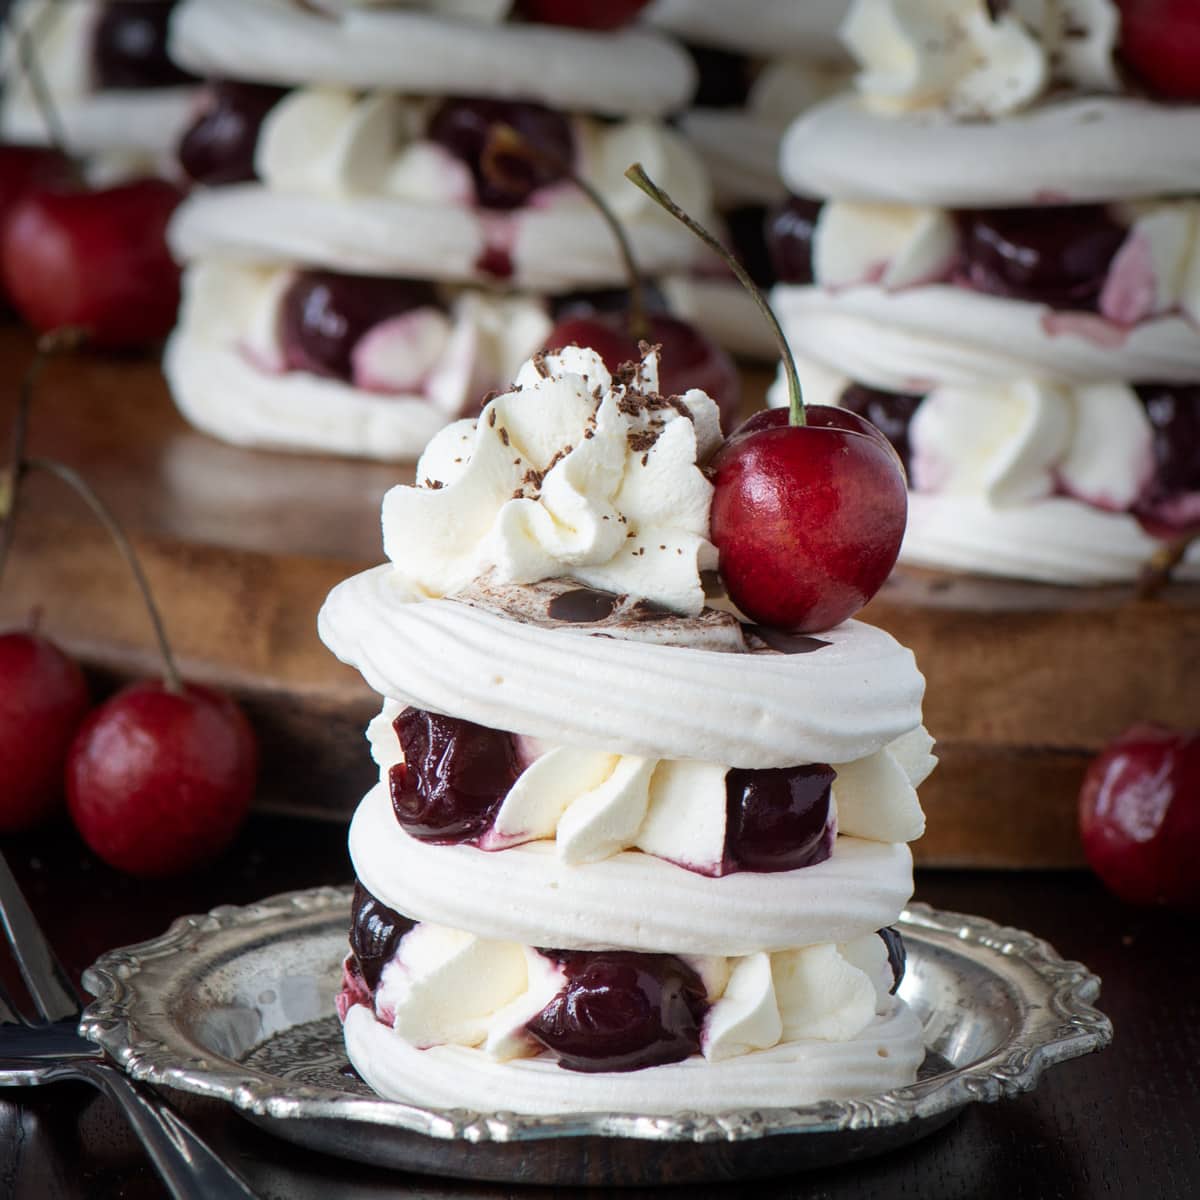 A Black Forest Meringue Stack. Three layers of meringue sandwiched with piped whipped cream and cherries.